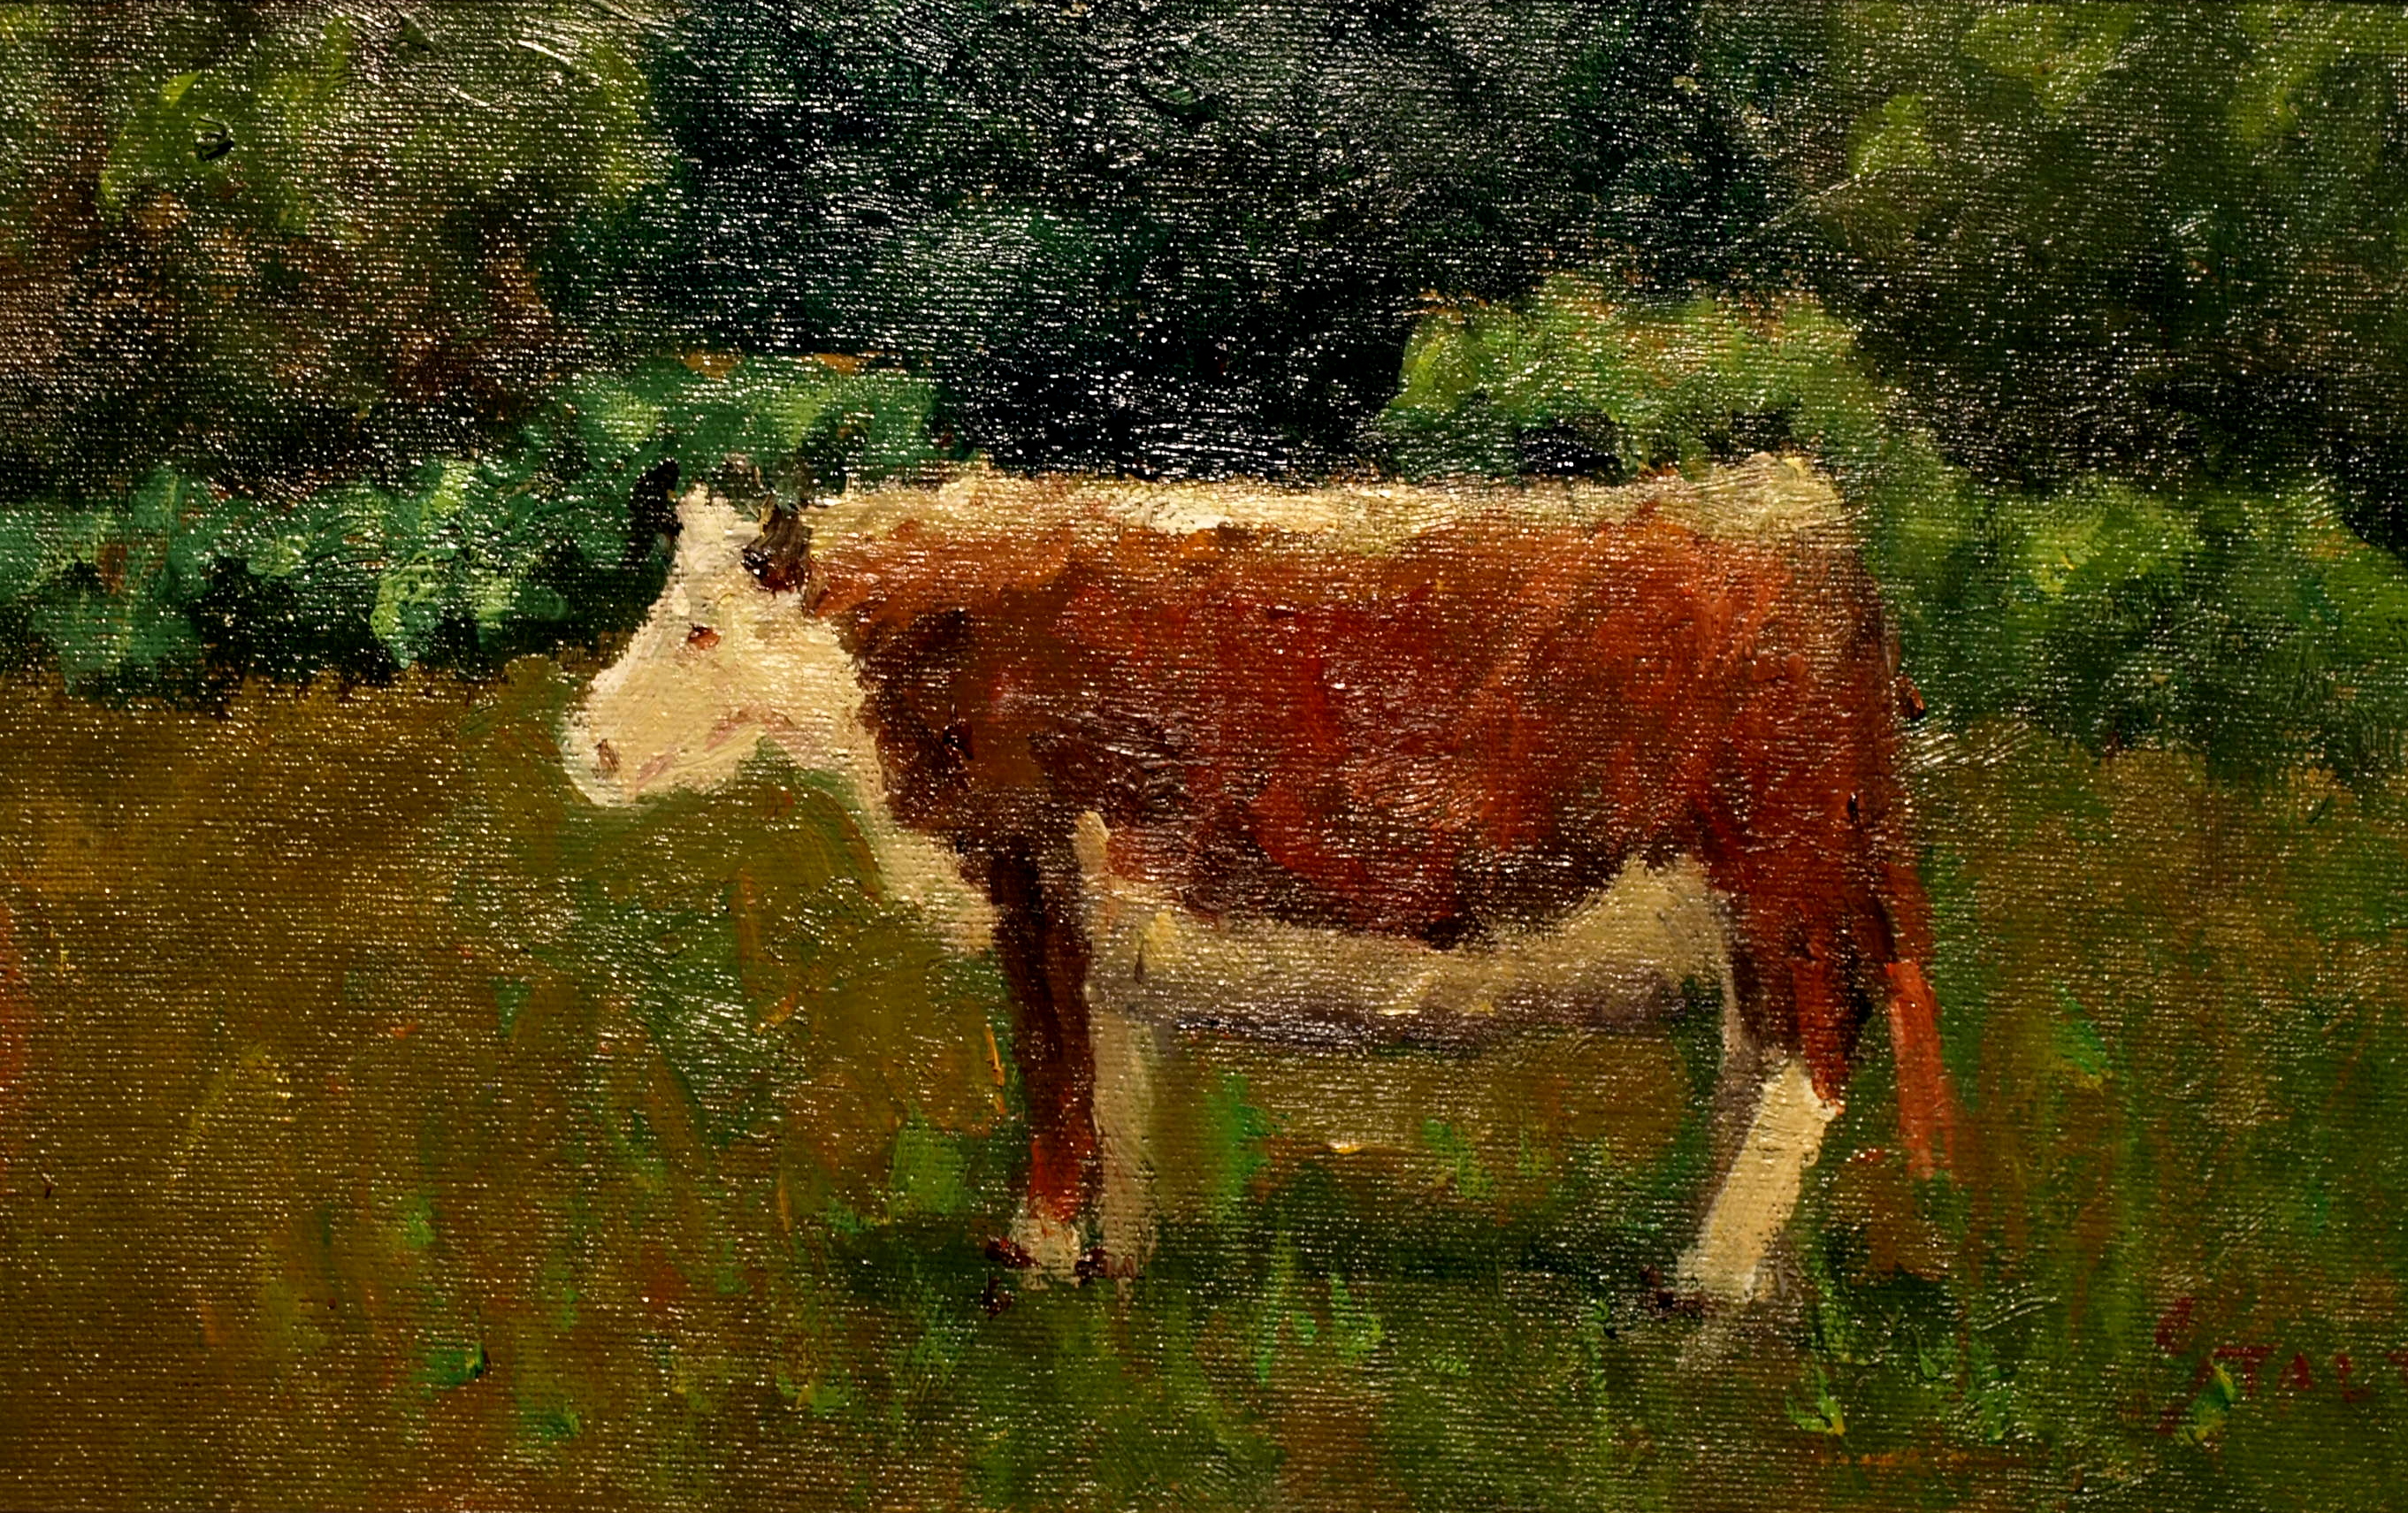 White Faced Cow, Oil on Canvas on Panel, 8 x 14 Inches, by Richard Stalter, $225